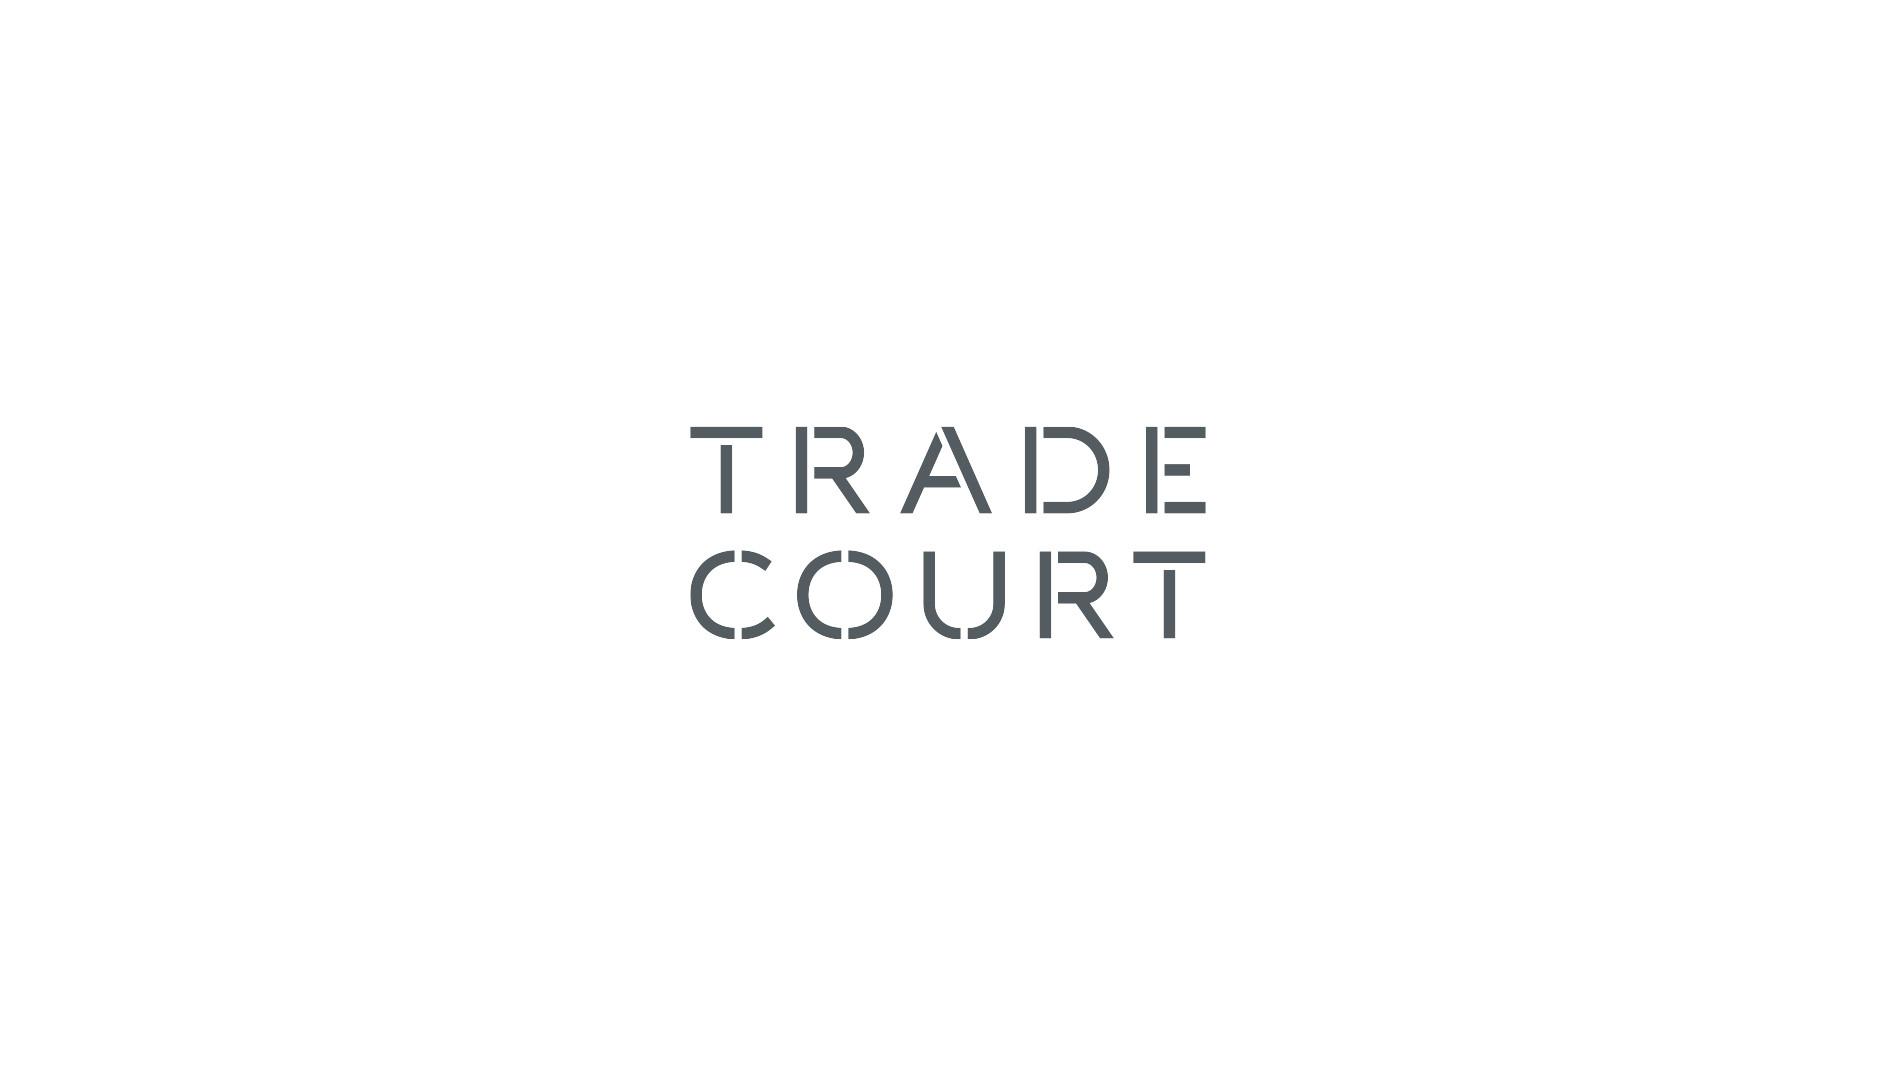 Trade Court in Crystal Palace, London SE19